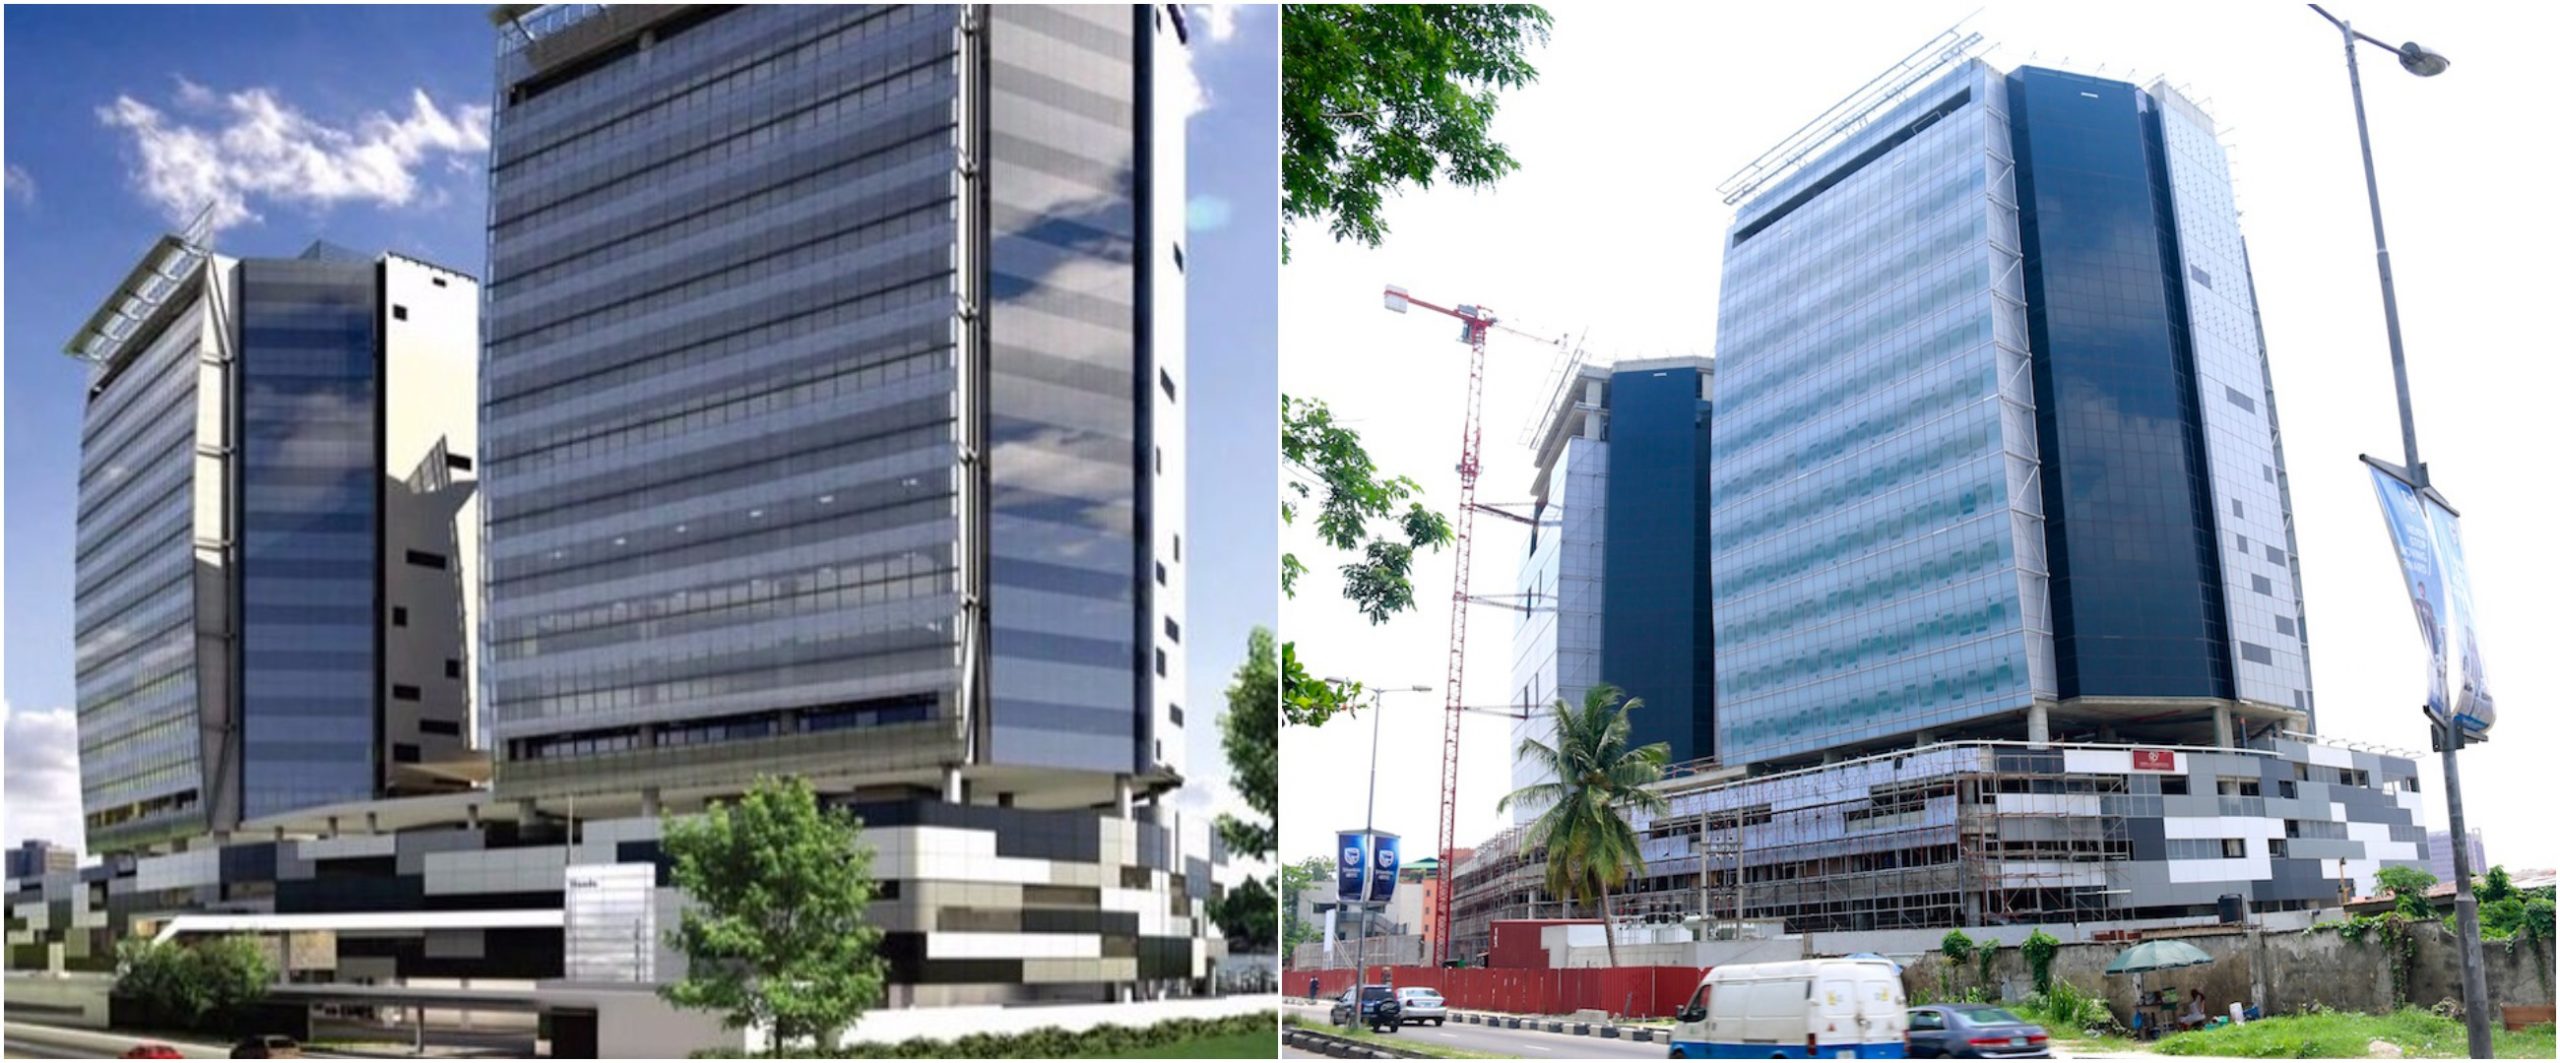 Redefine Will Dispose of Pivotal&#8217;s African Assets including The Wings Towers in Lagos